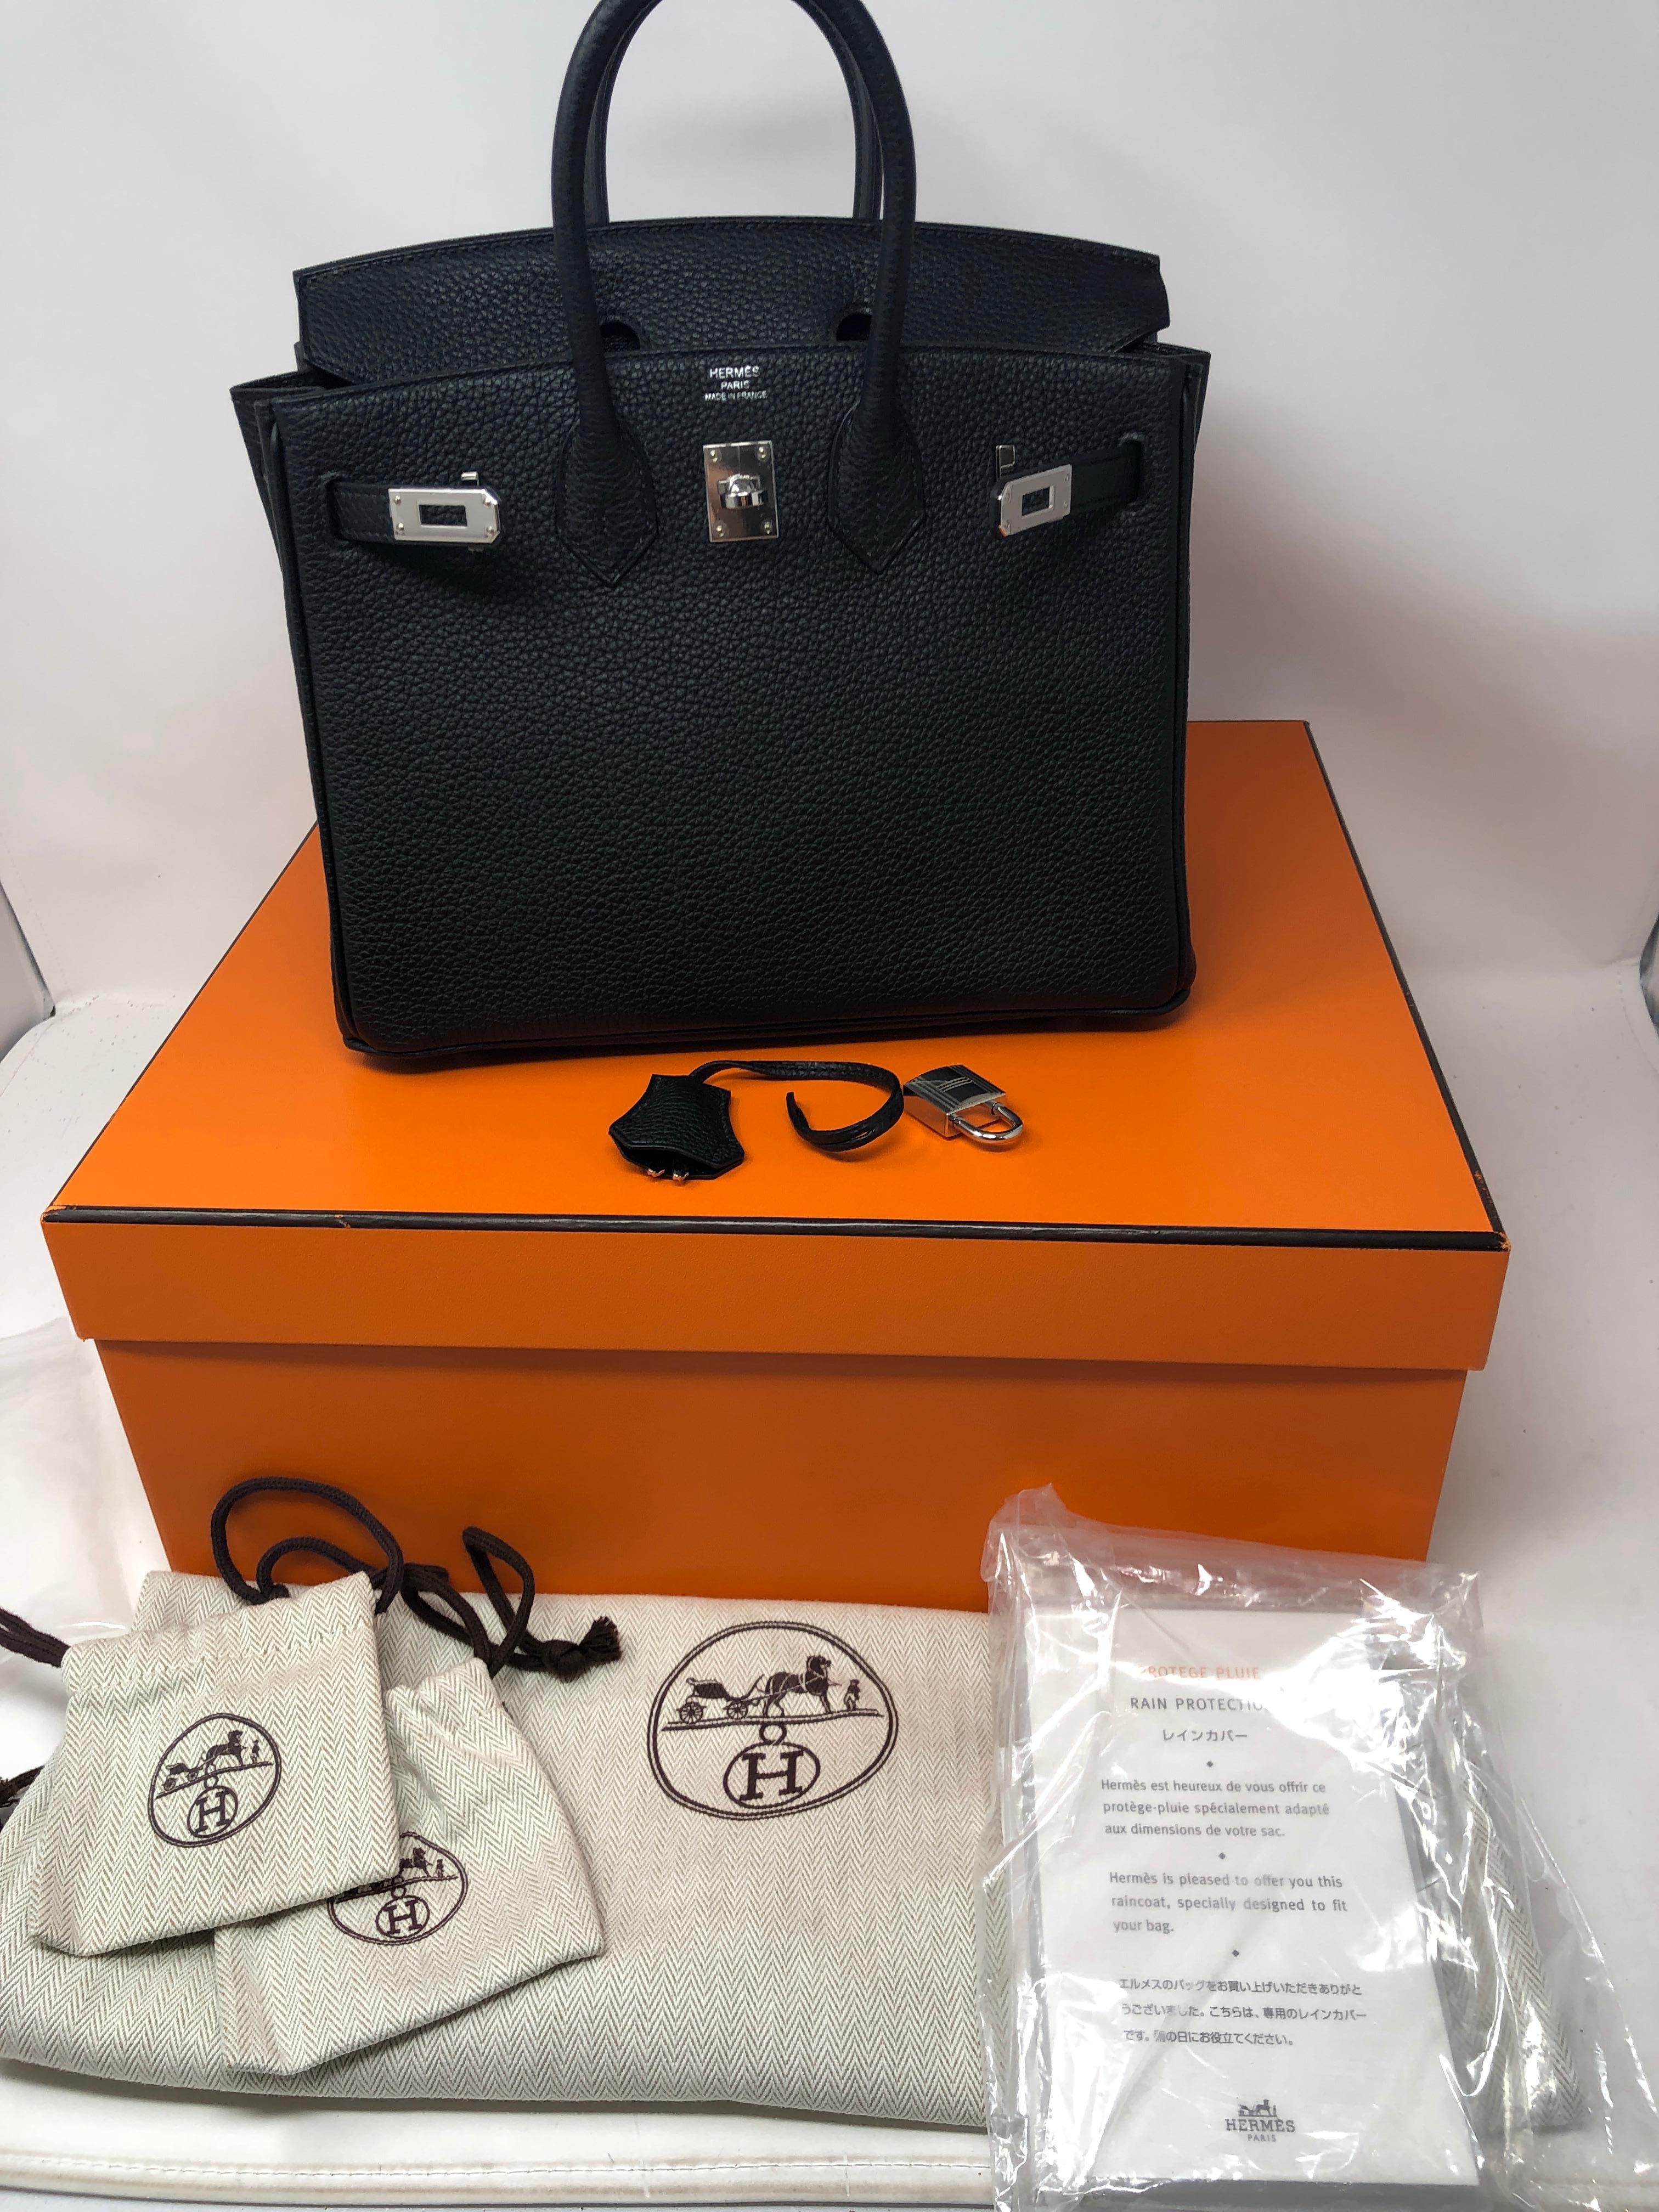 Hermes Black Birkin 25 Togo Leather. Palladium hardware. Brand New 2018. Never worn. Still has plastic on hardware. Own the Most Wanted Birkin of them all. The mini size 25. Extremely rare and hard to get size. Complete with Full set. Clochette,